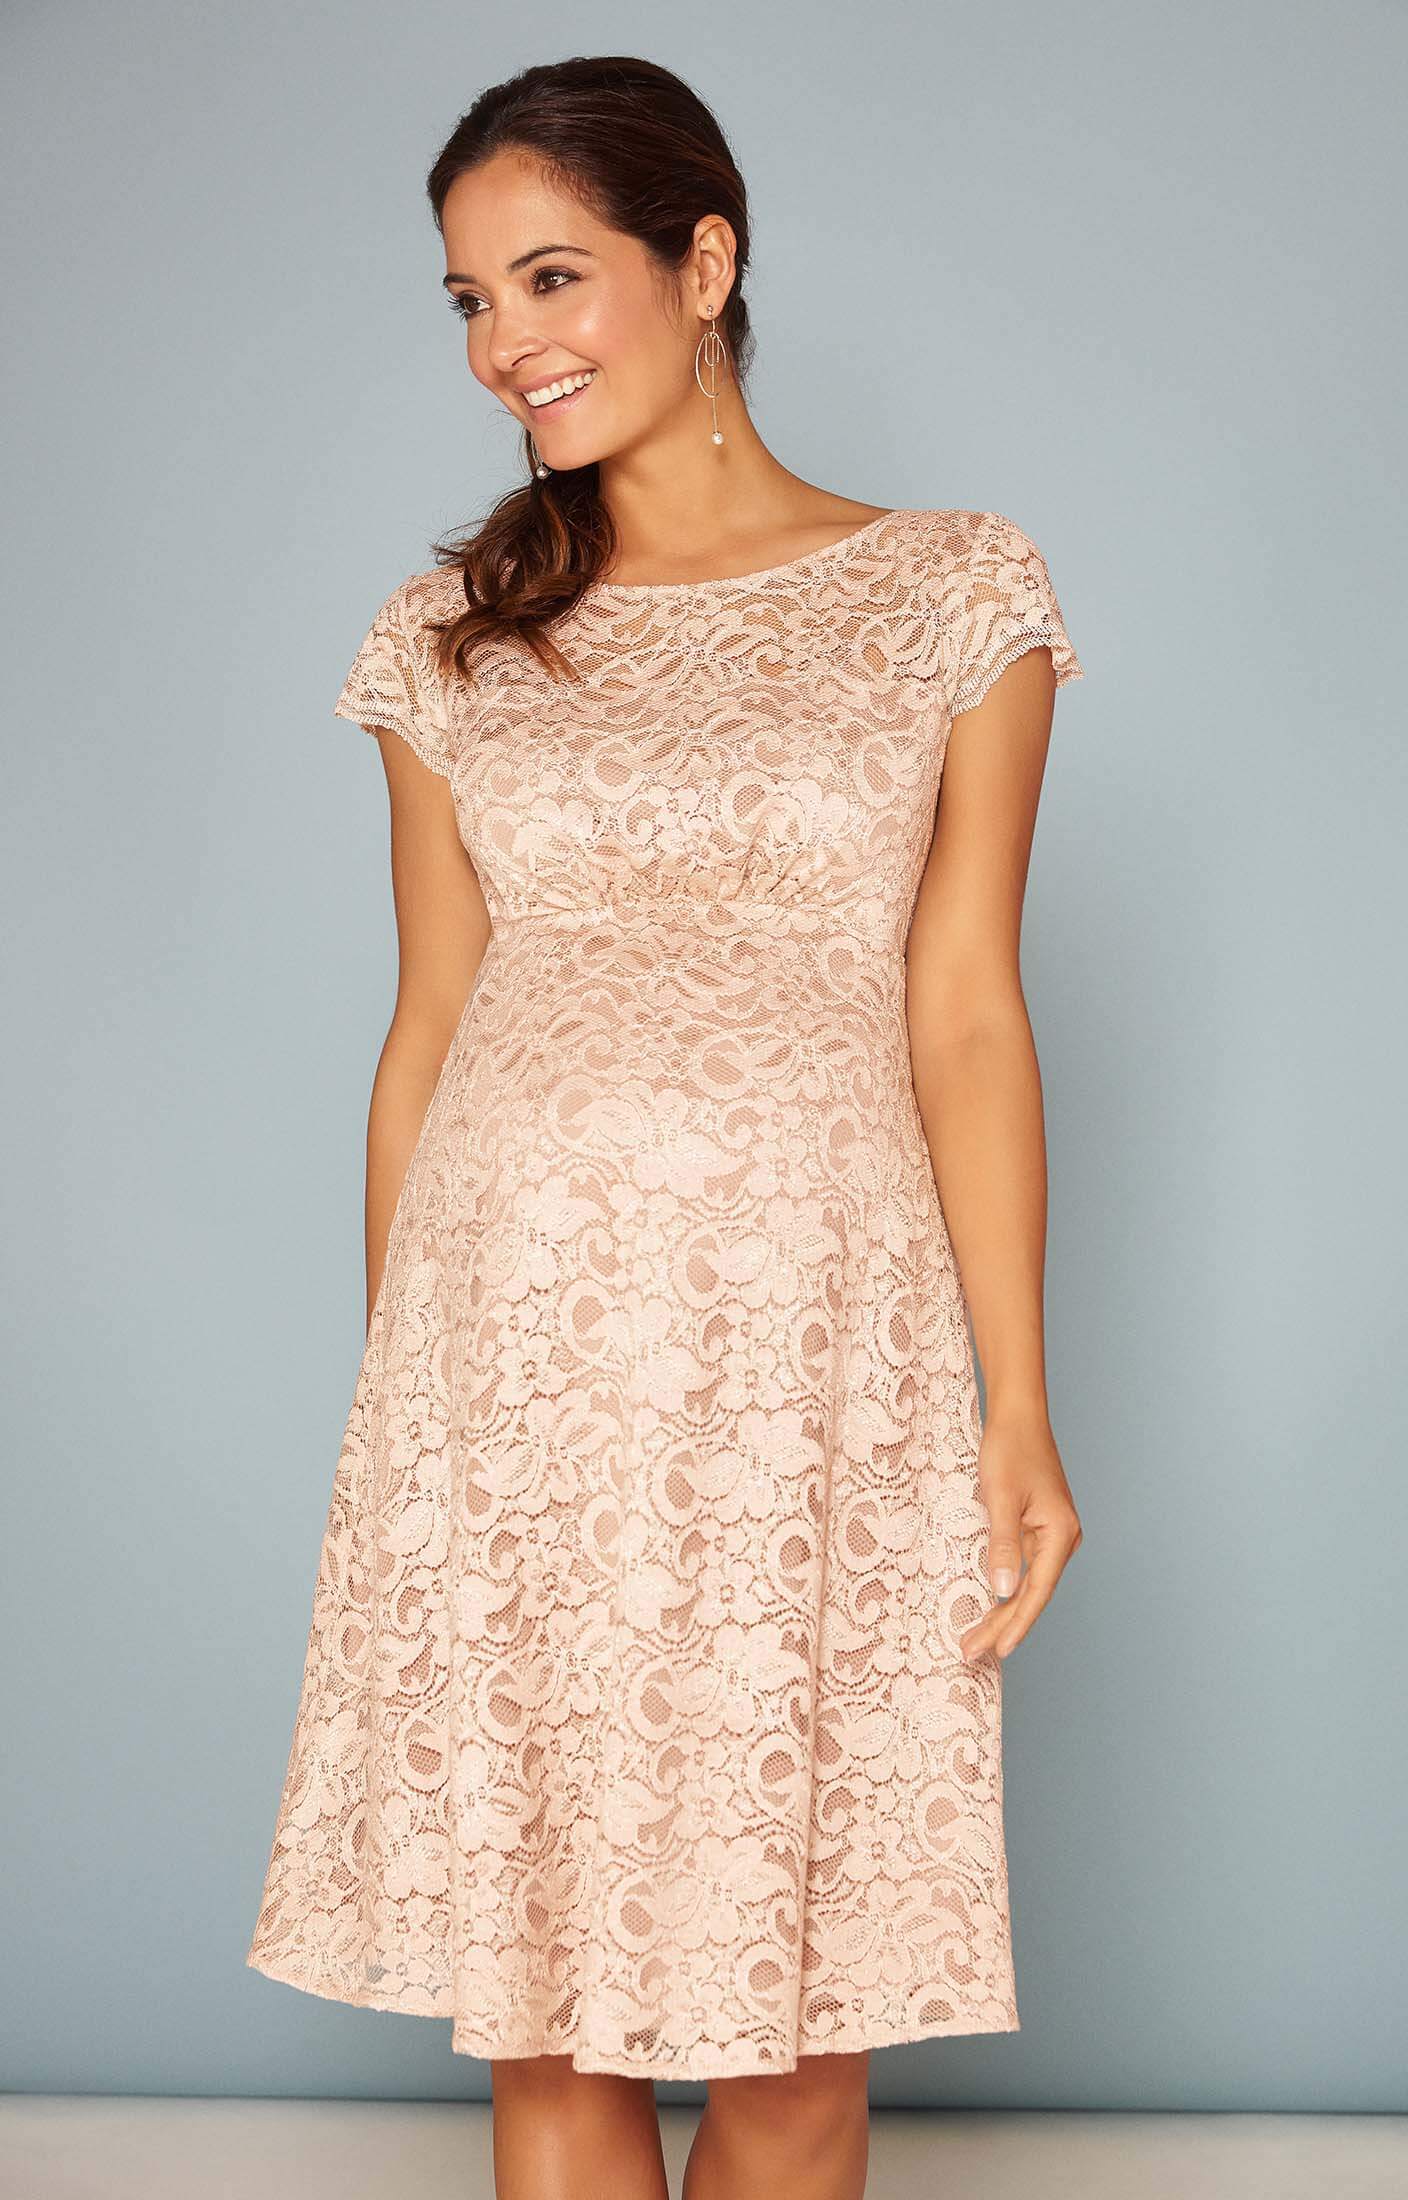 Pink Blush Maternity Clothing On Sale Up To 90% Off Retail